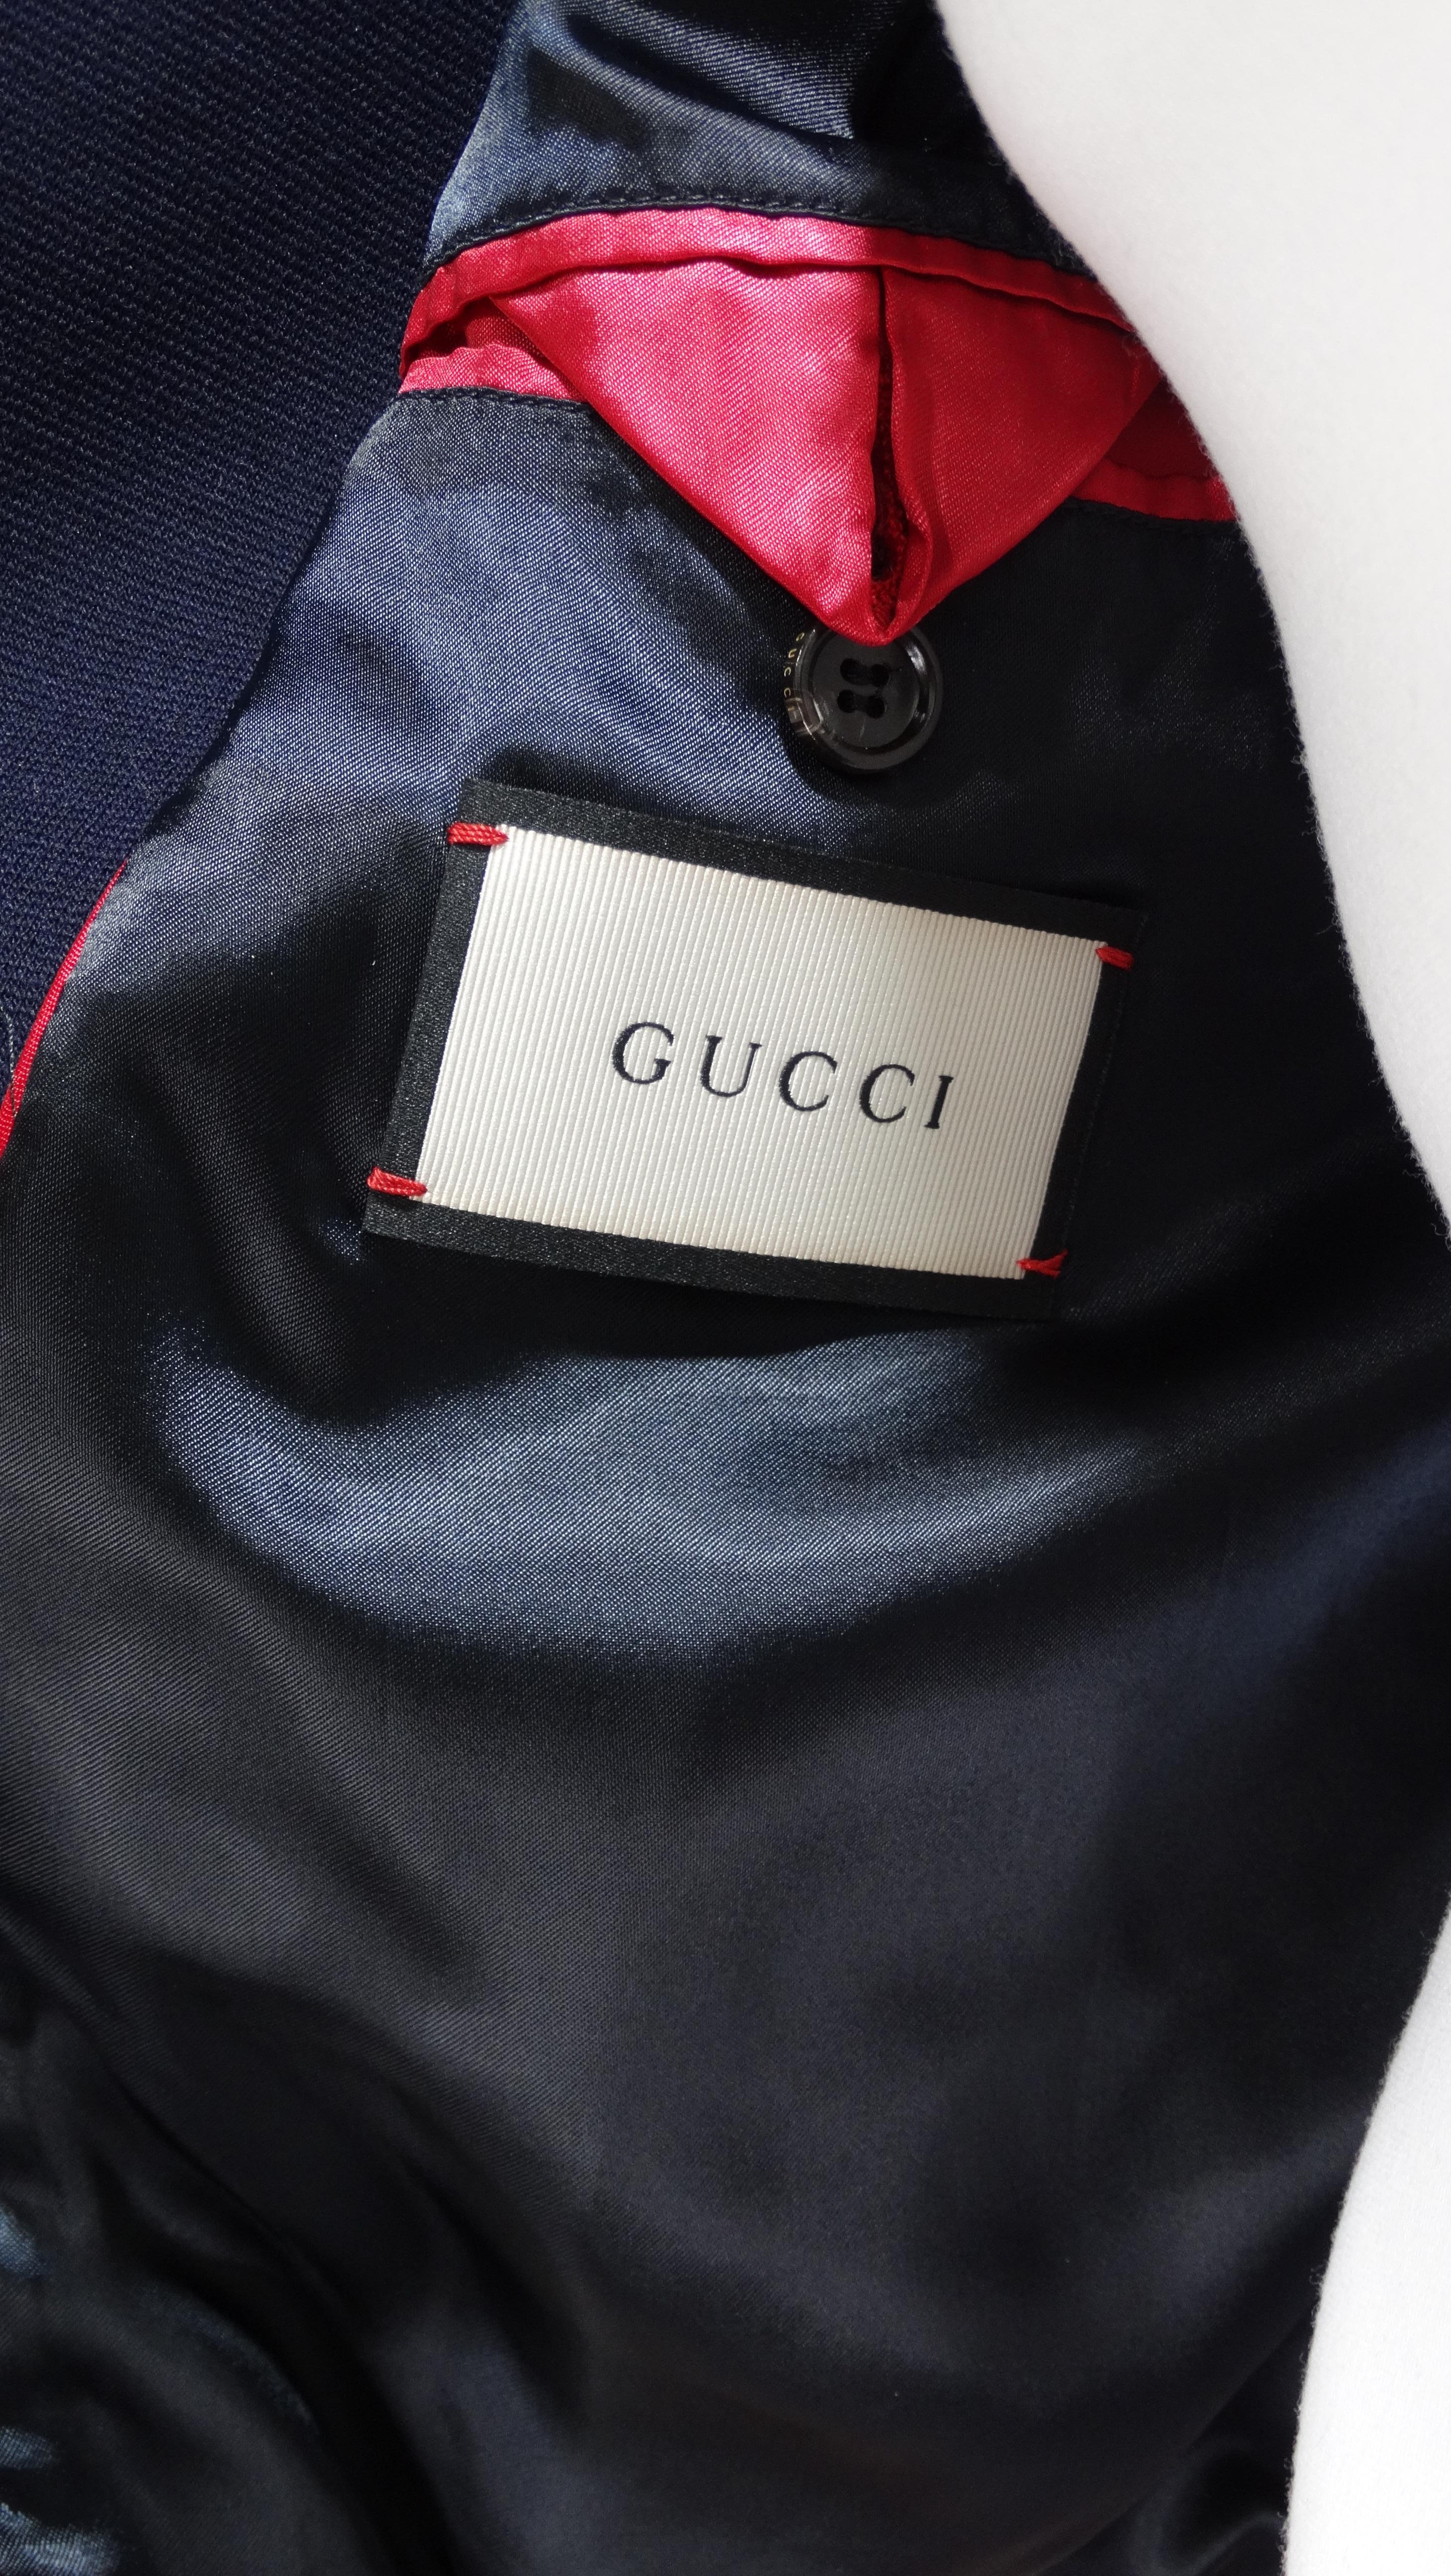 Women's or Men's Gucci Blue & Red Bomber Jacket